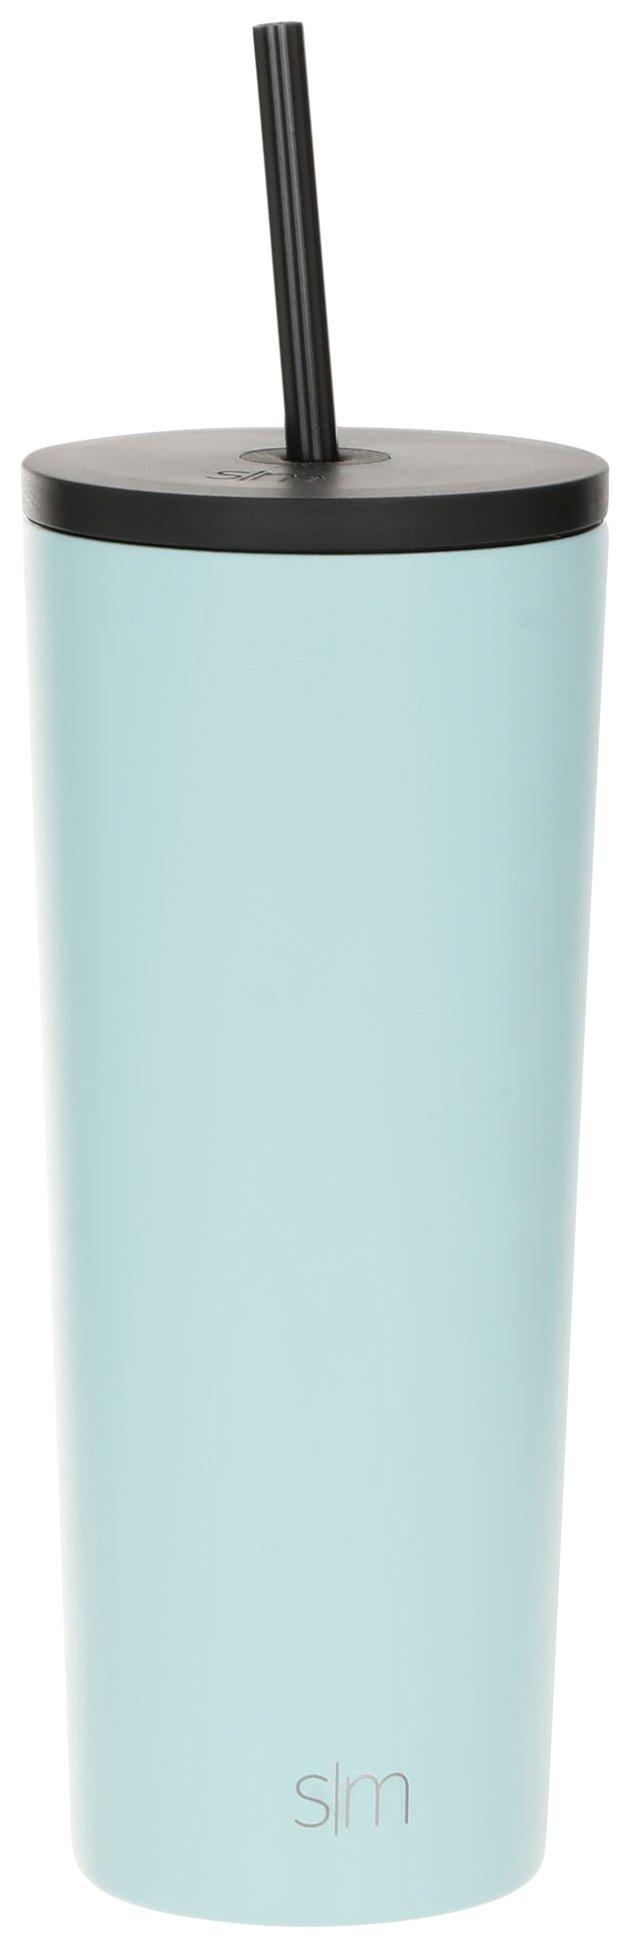 24oz Classic Stainless Steel Tumbler With Straw